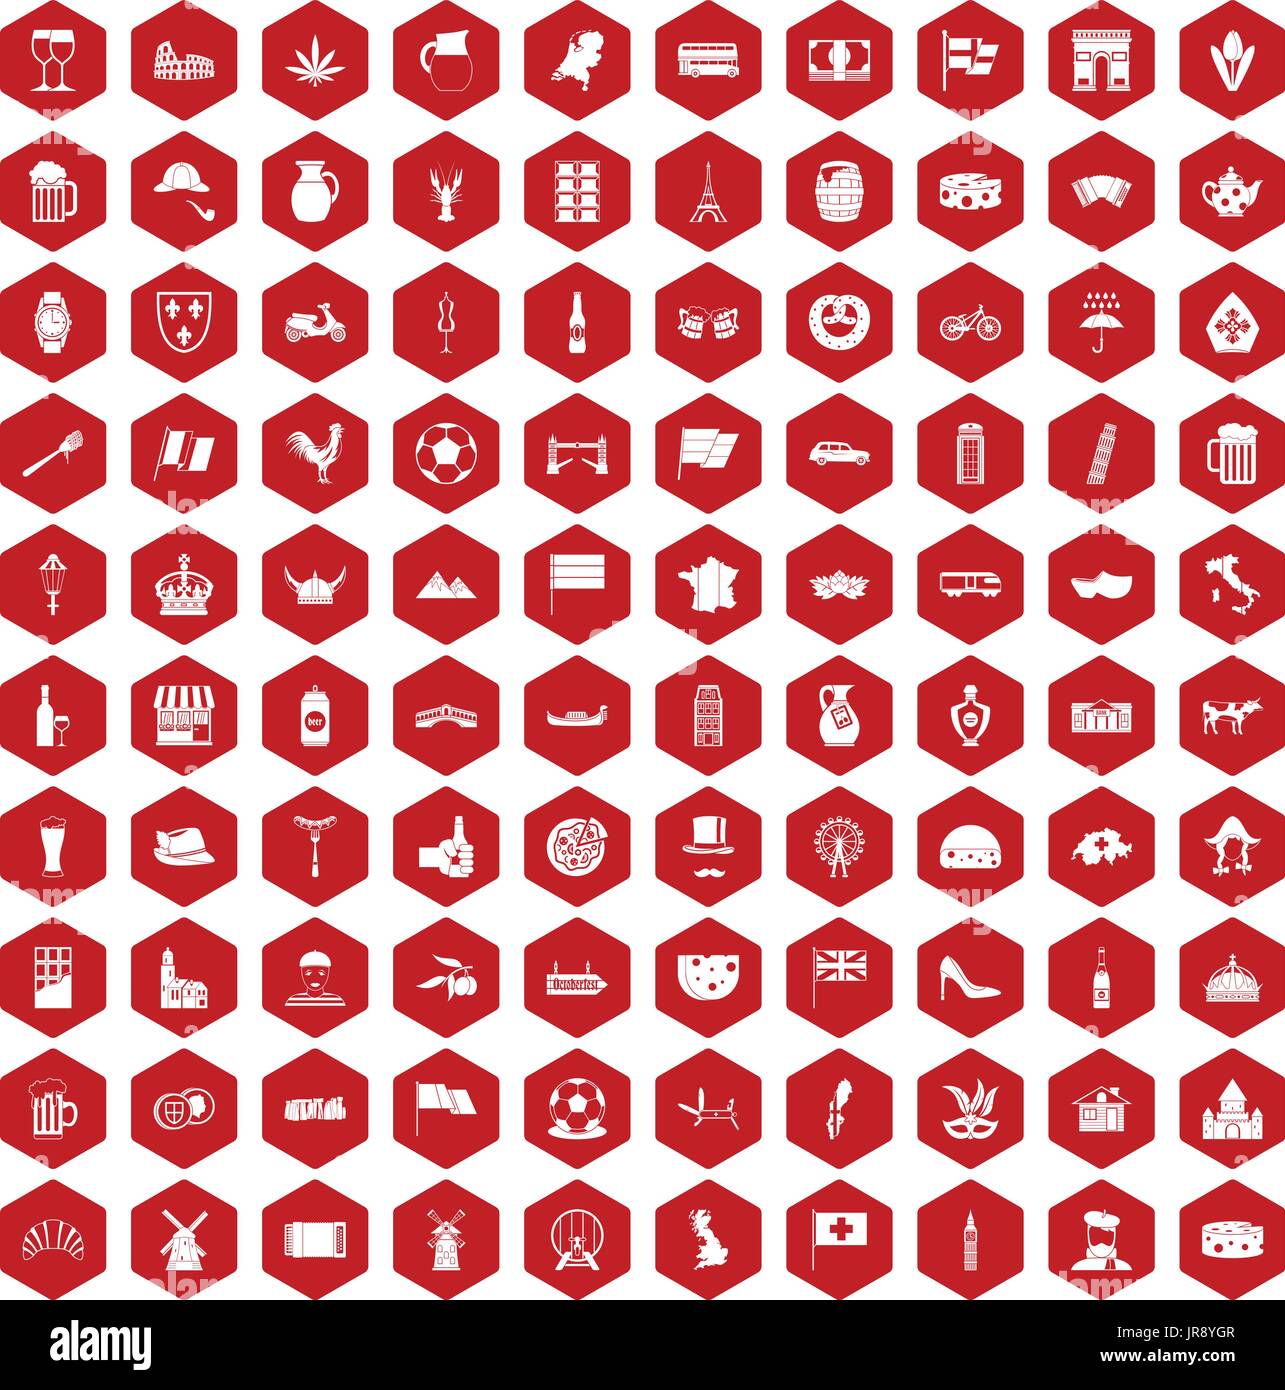 100 europe countries icons hexagon red Stock Vector